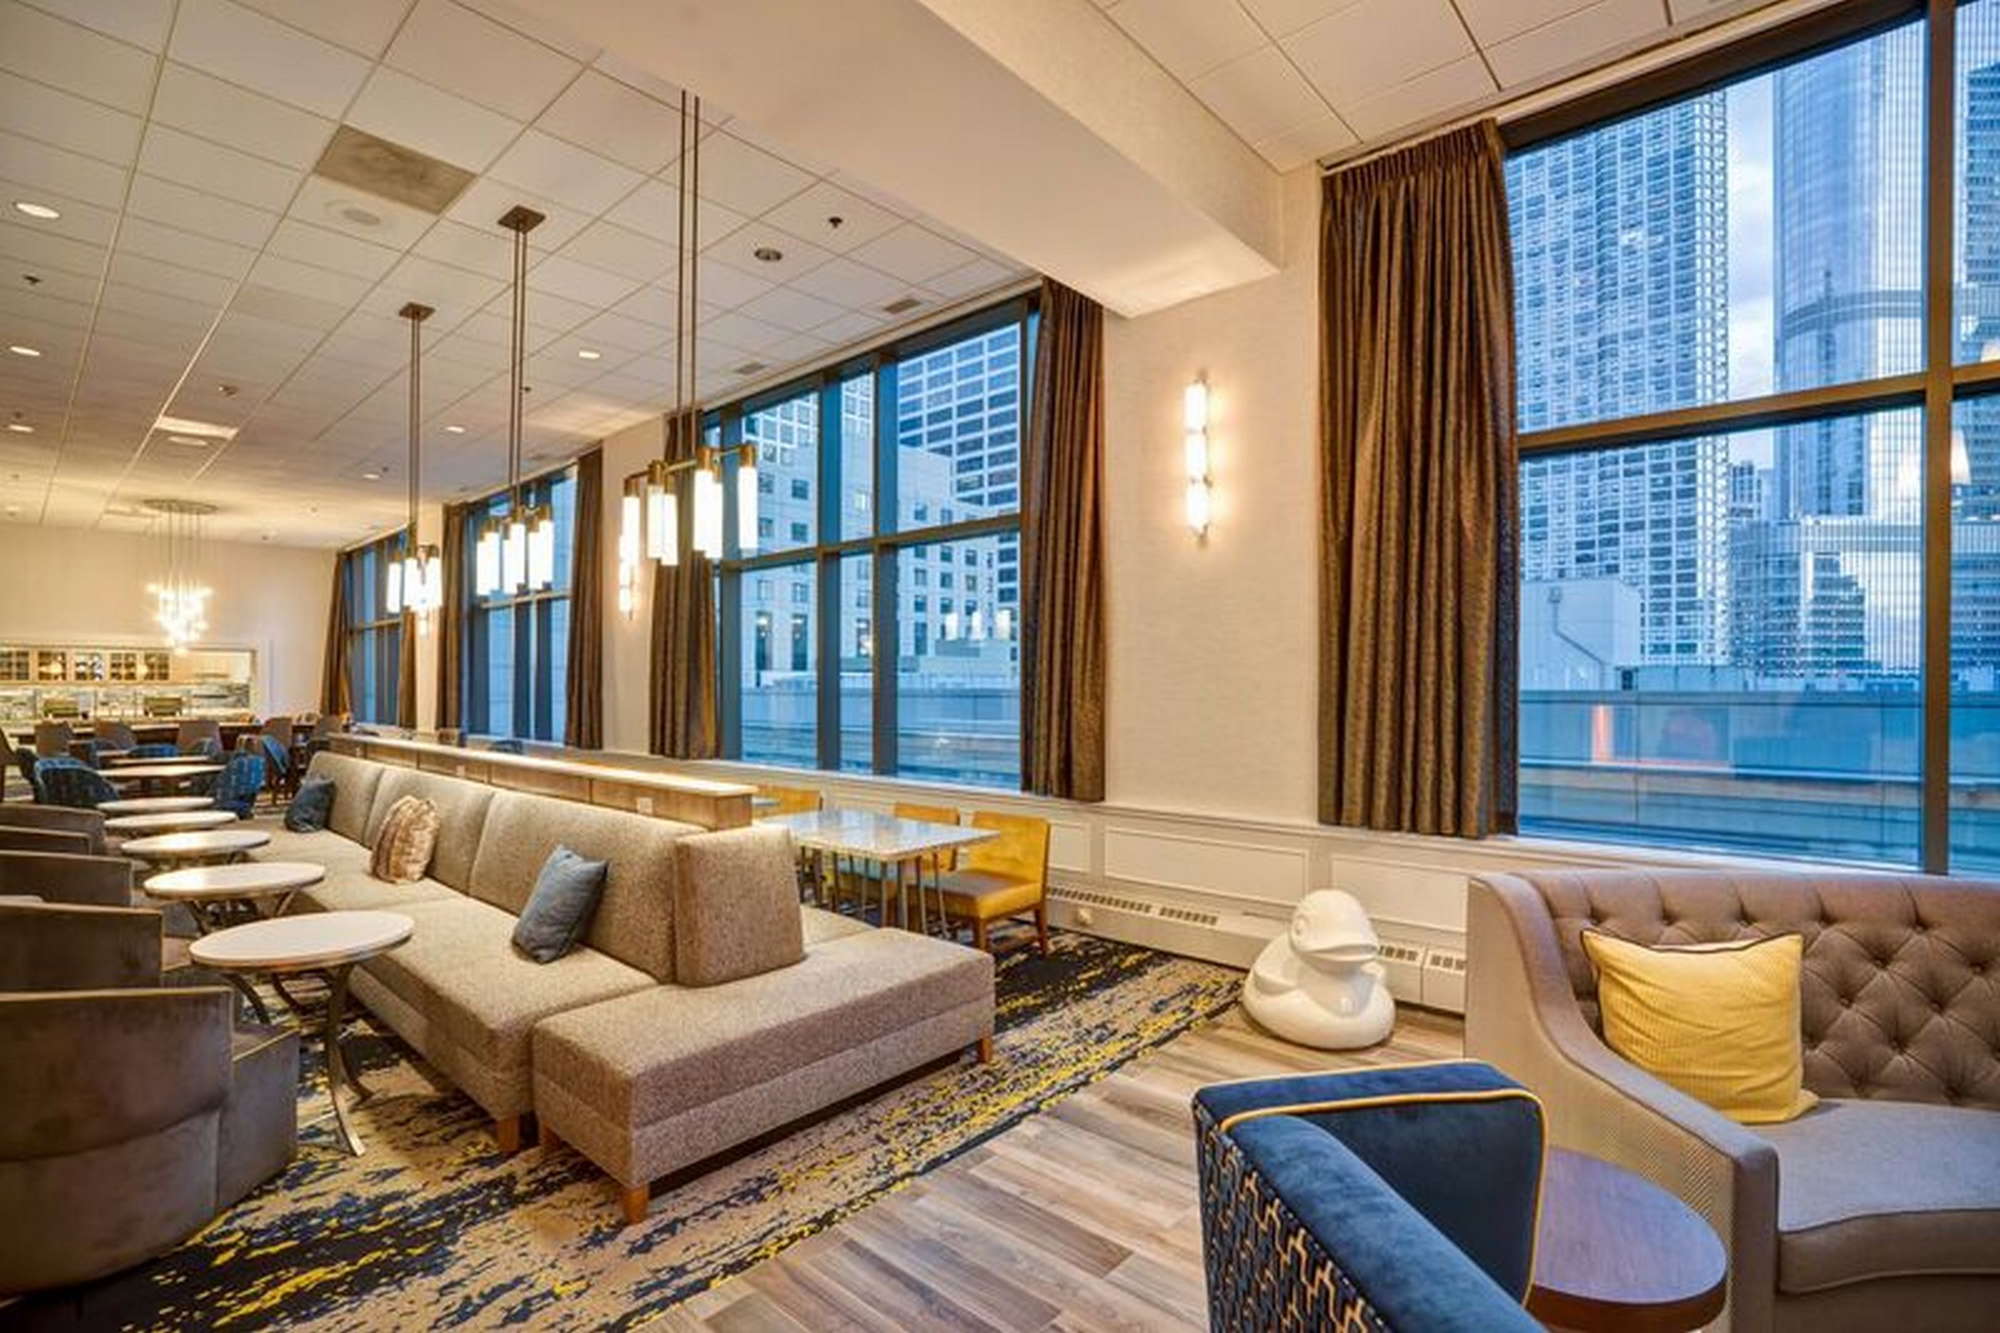 Homewood Suites By Hilton Chicago Downtown Expert Review Fodor S